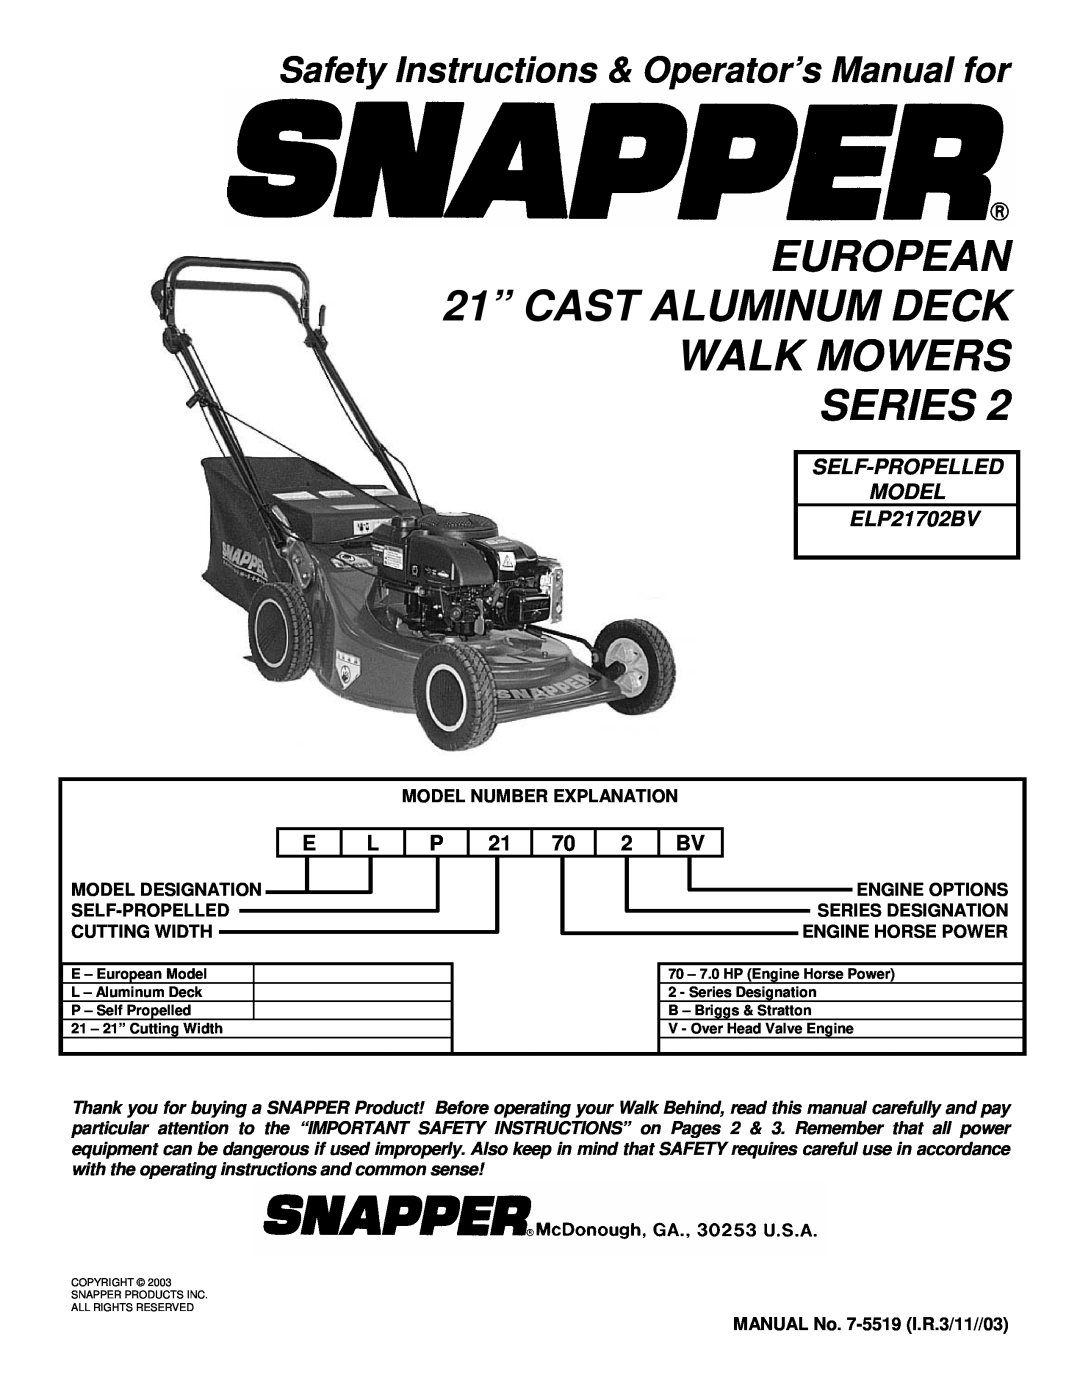 Snapper ELP21702BV important safety instructions Safety Instructions & Operator’s Manual for 